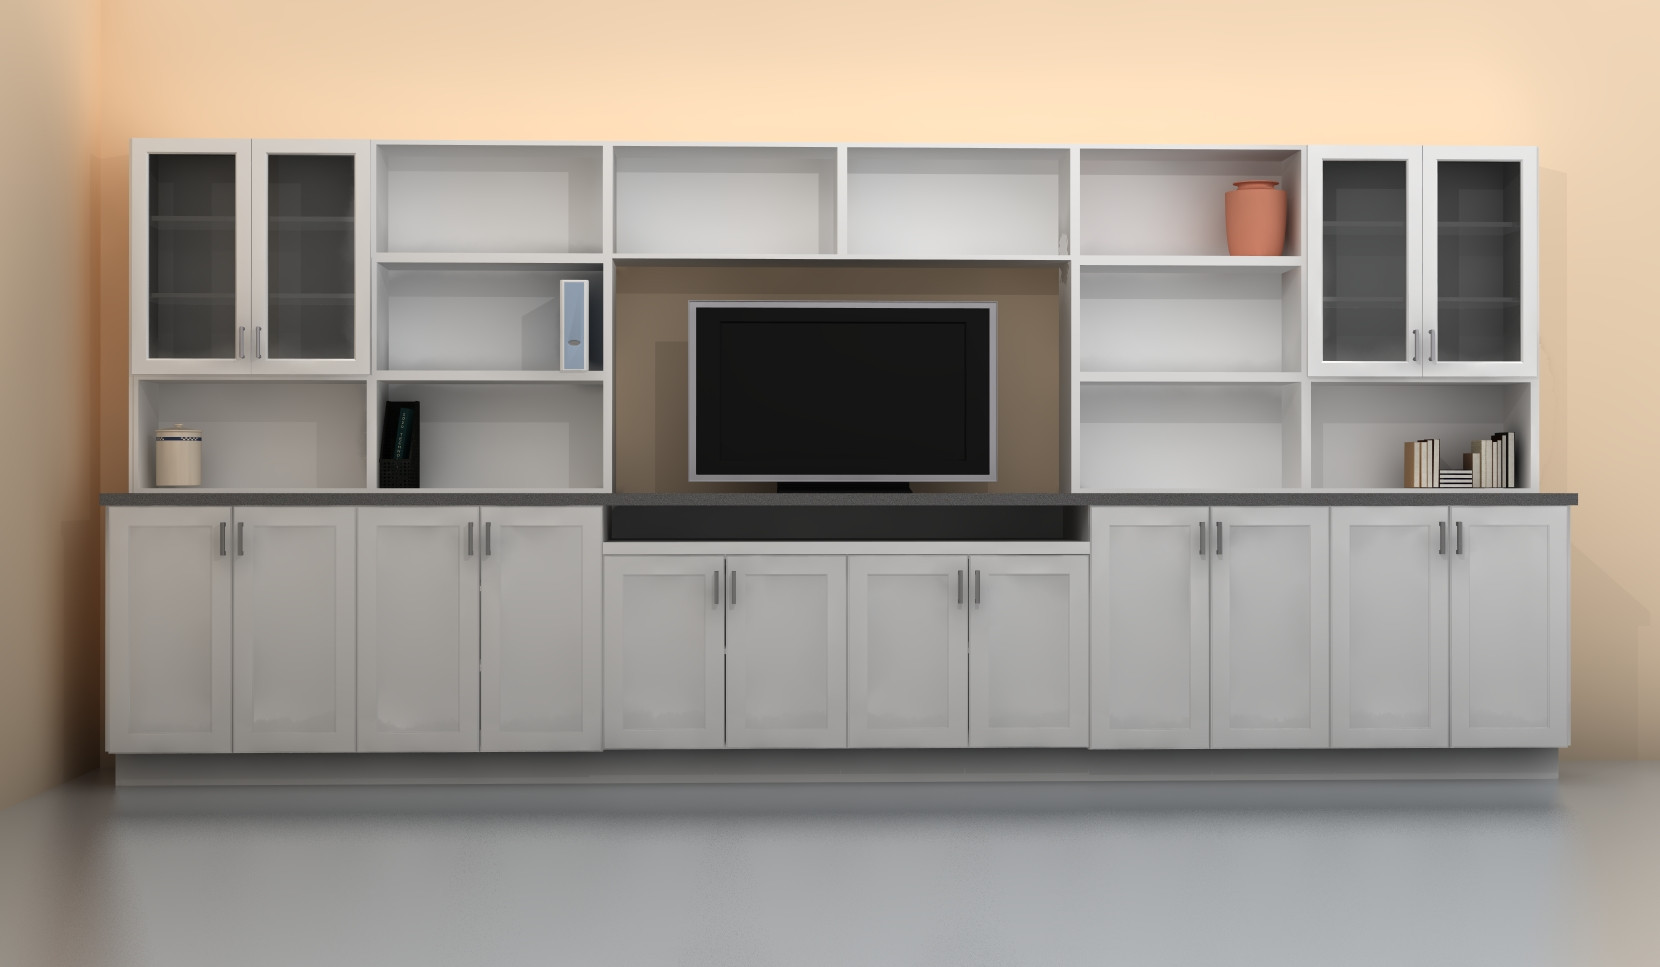 Bedroom Wall Storage Units
 Wall to walk storage cabinets small dining room cabinets